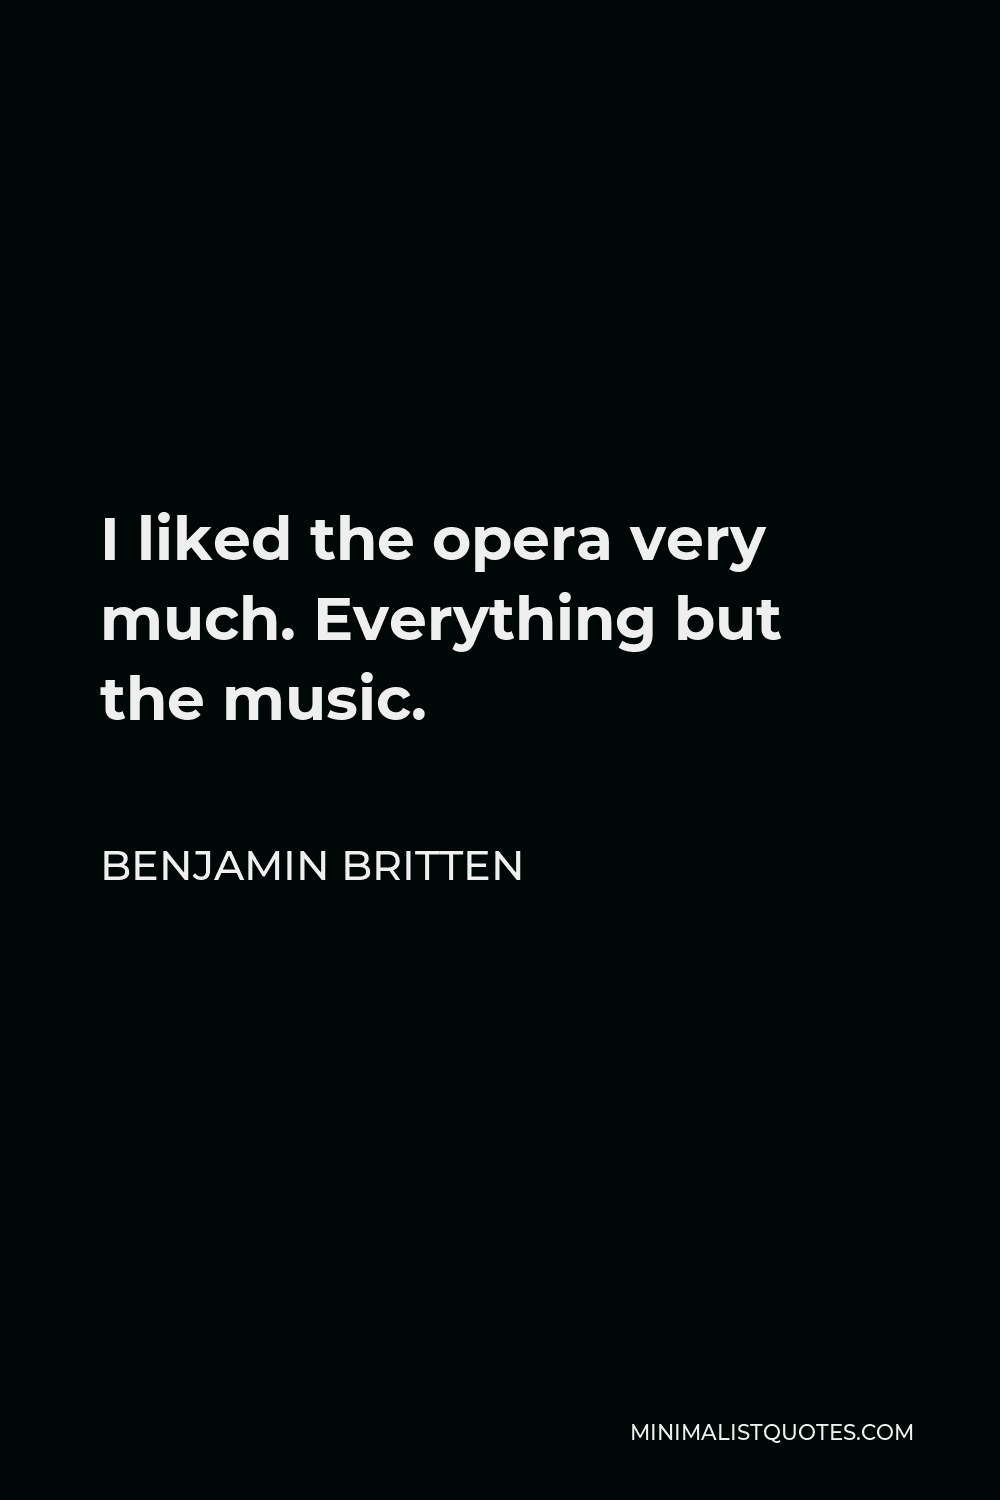 Benjamin Britten Quote - I liked the opera very much. Everything but the music.